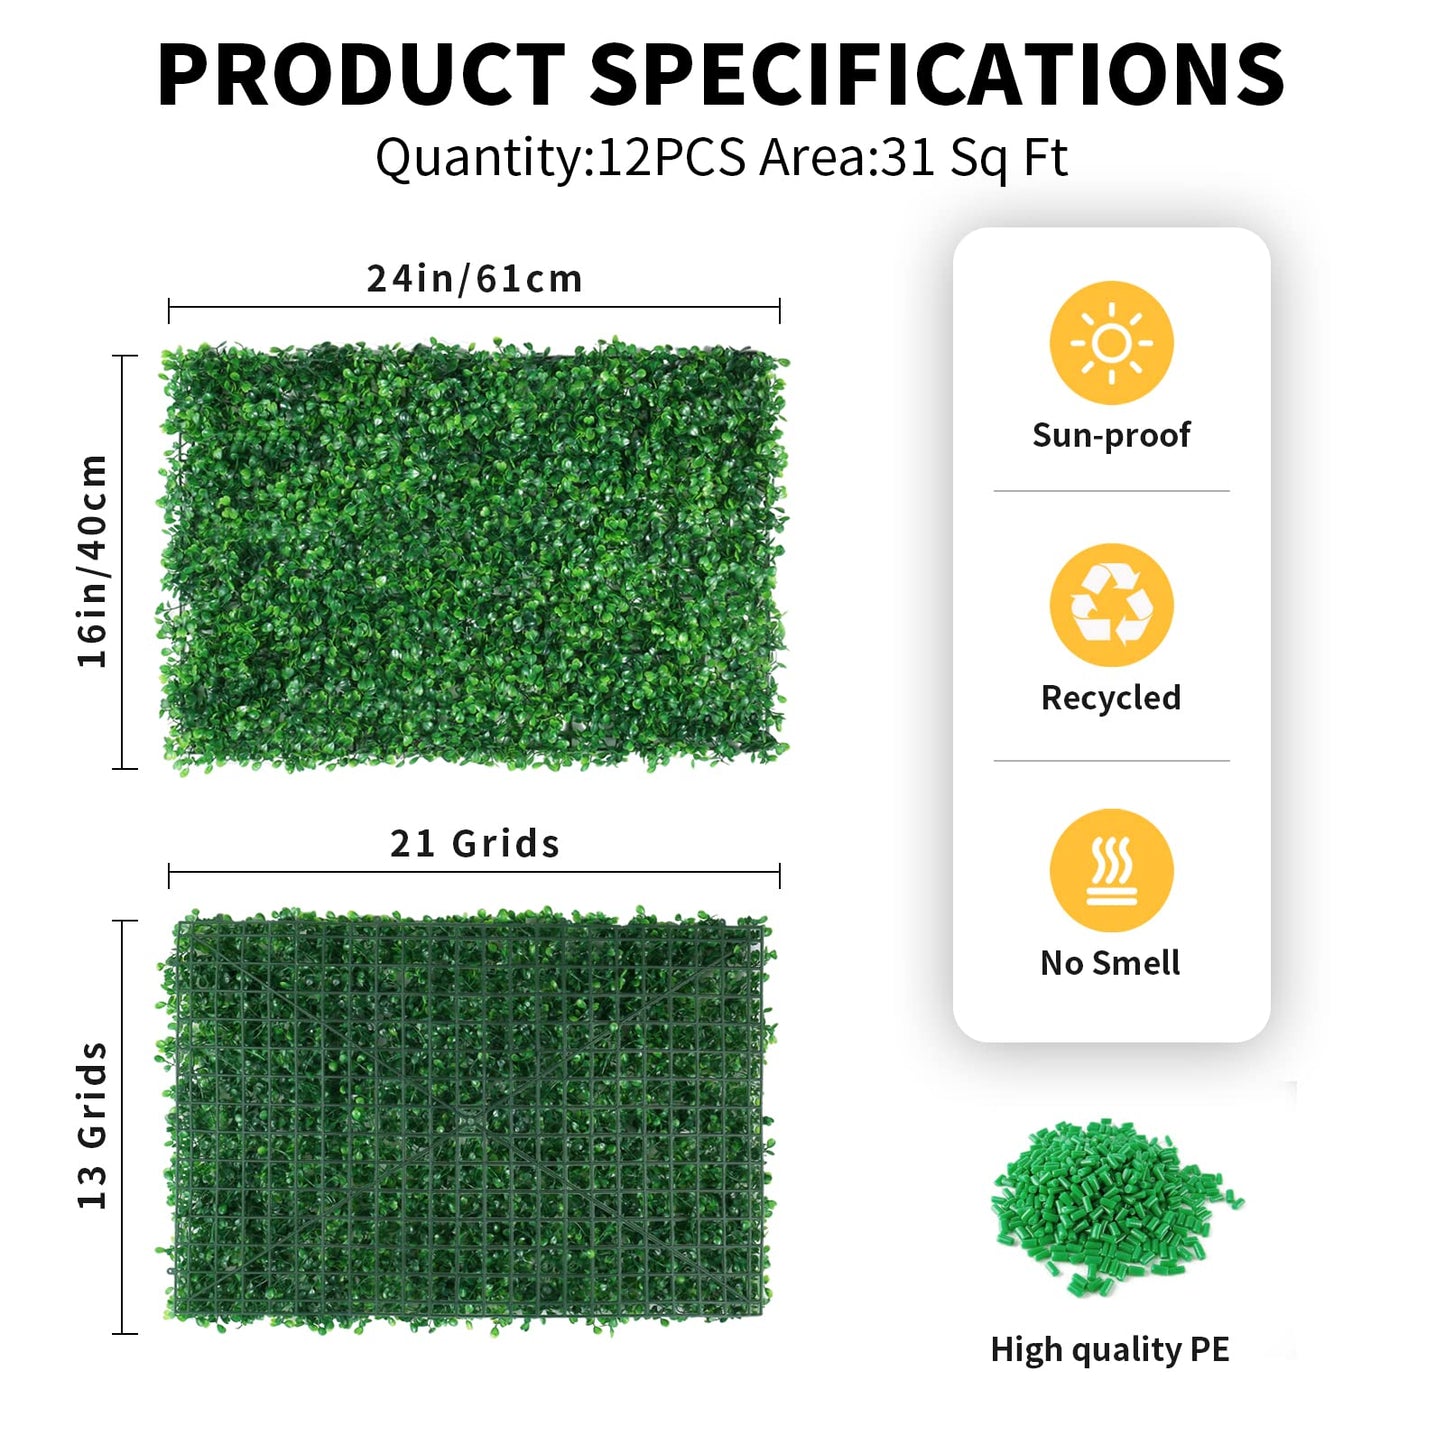 12PCS Grass Wall Panels for 31 SQ Feet, 24" x 16" Faux Hedge Grass Backdrop Wall Privacy Fence UV Protection for Indoor, Wedding, Party, Outdoor Garden, Greenery Backdrop Decoration